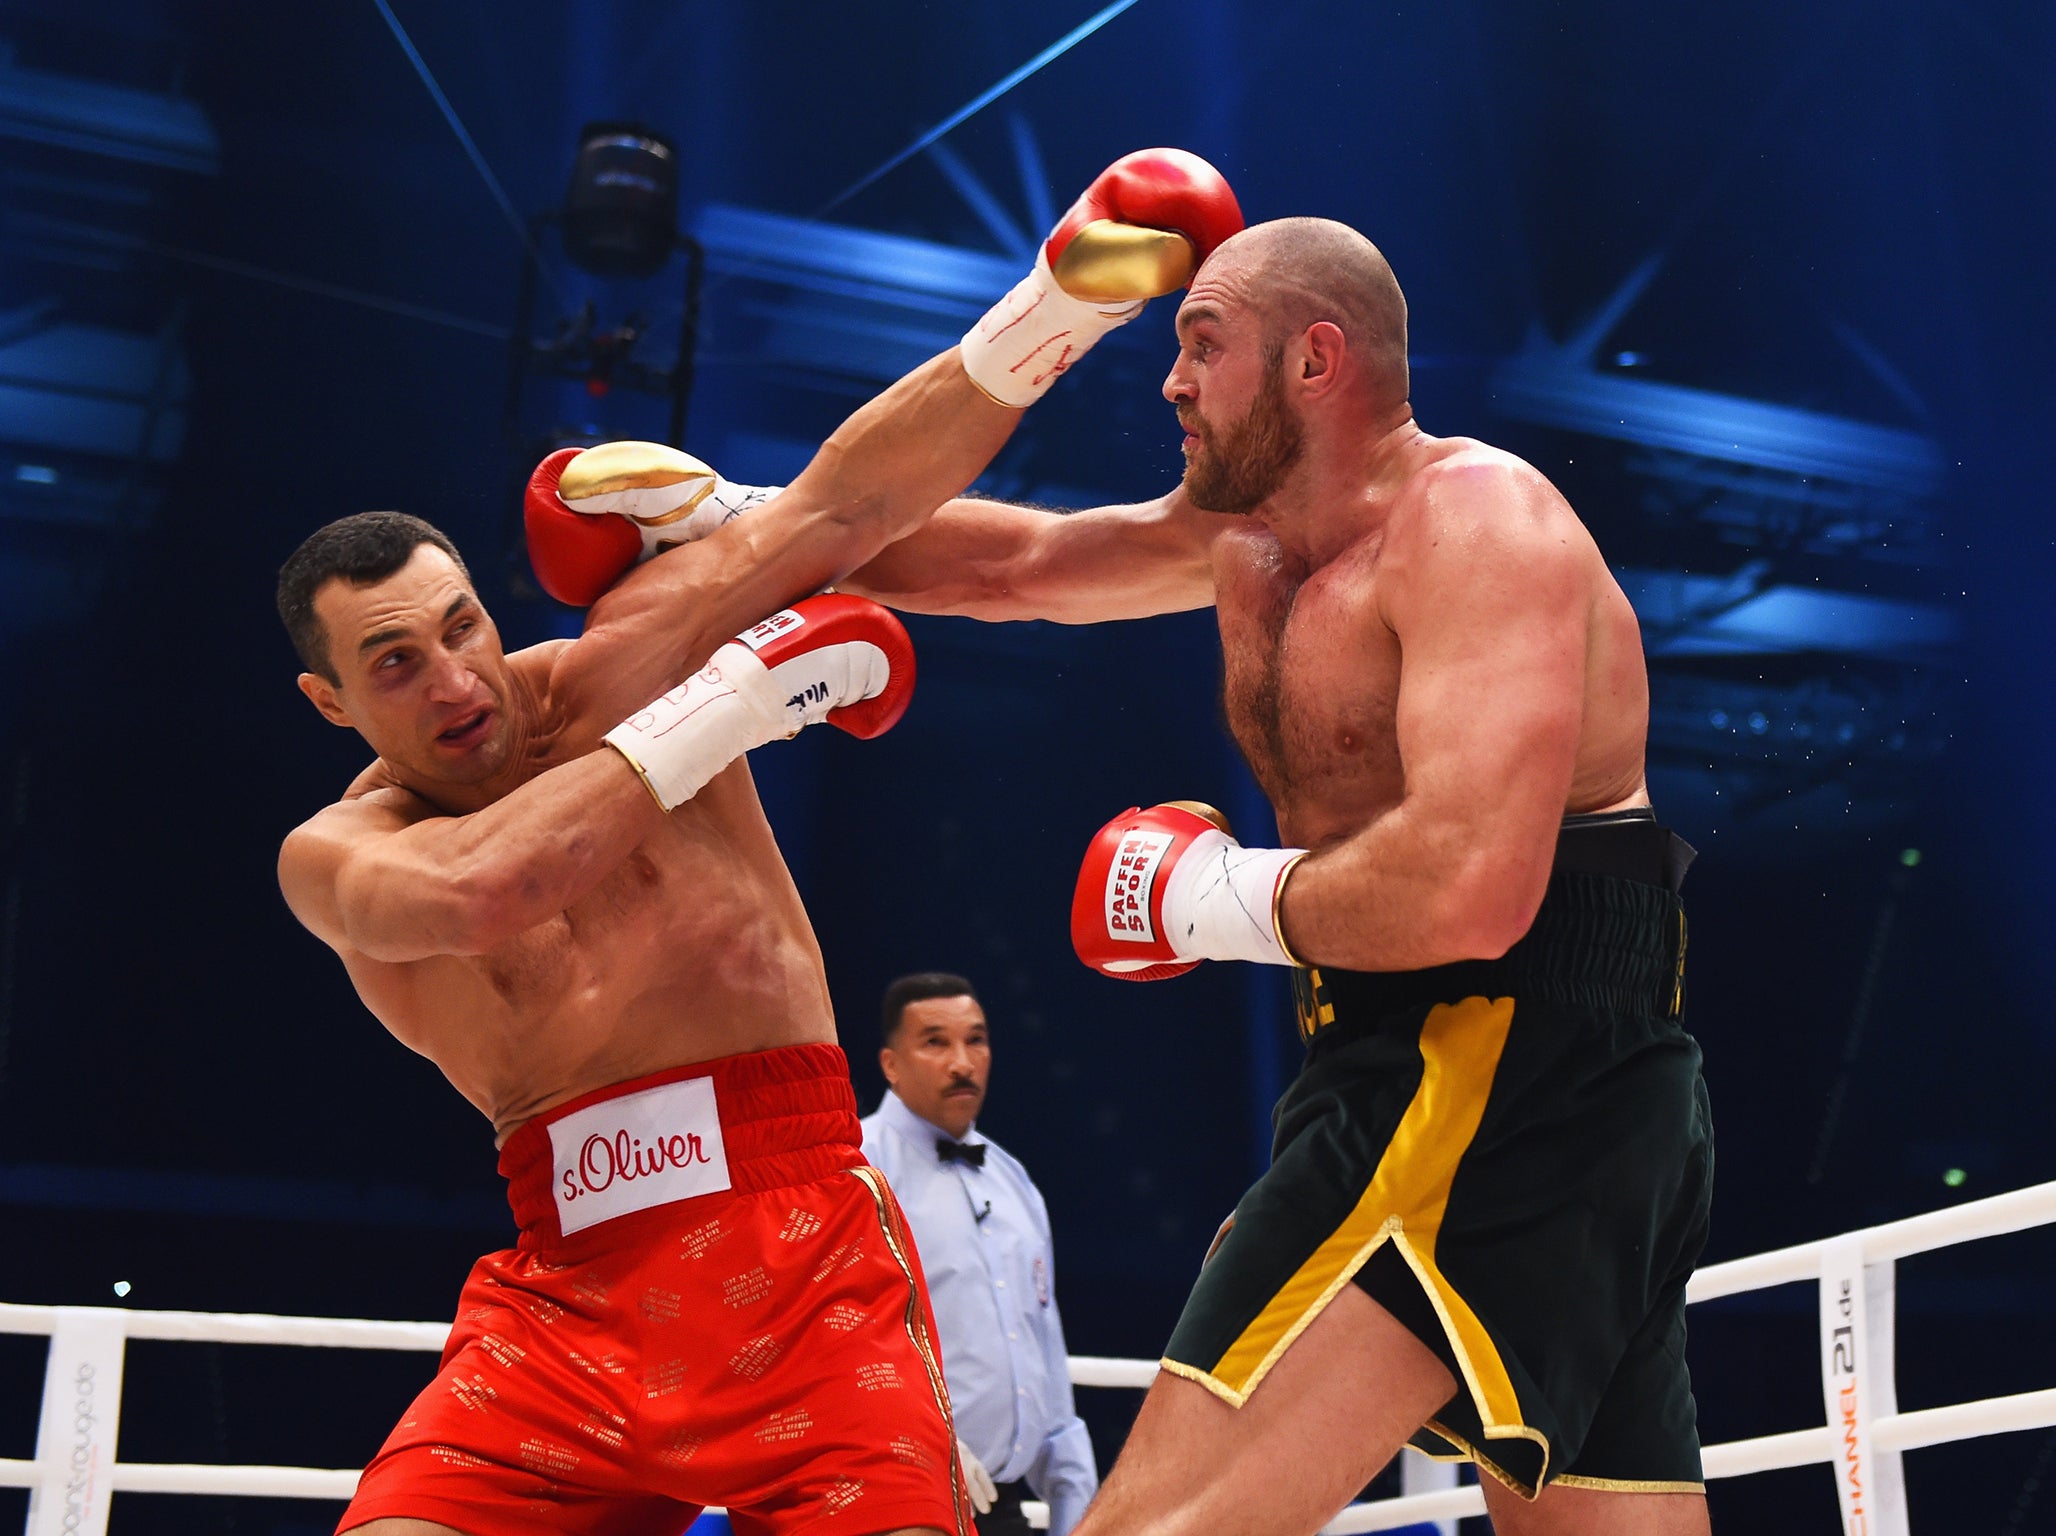 Fury has been inactive since outpointing Klitschko two-years ago